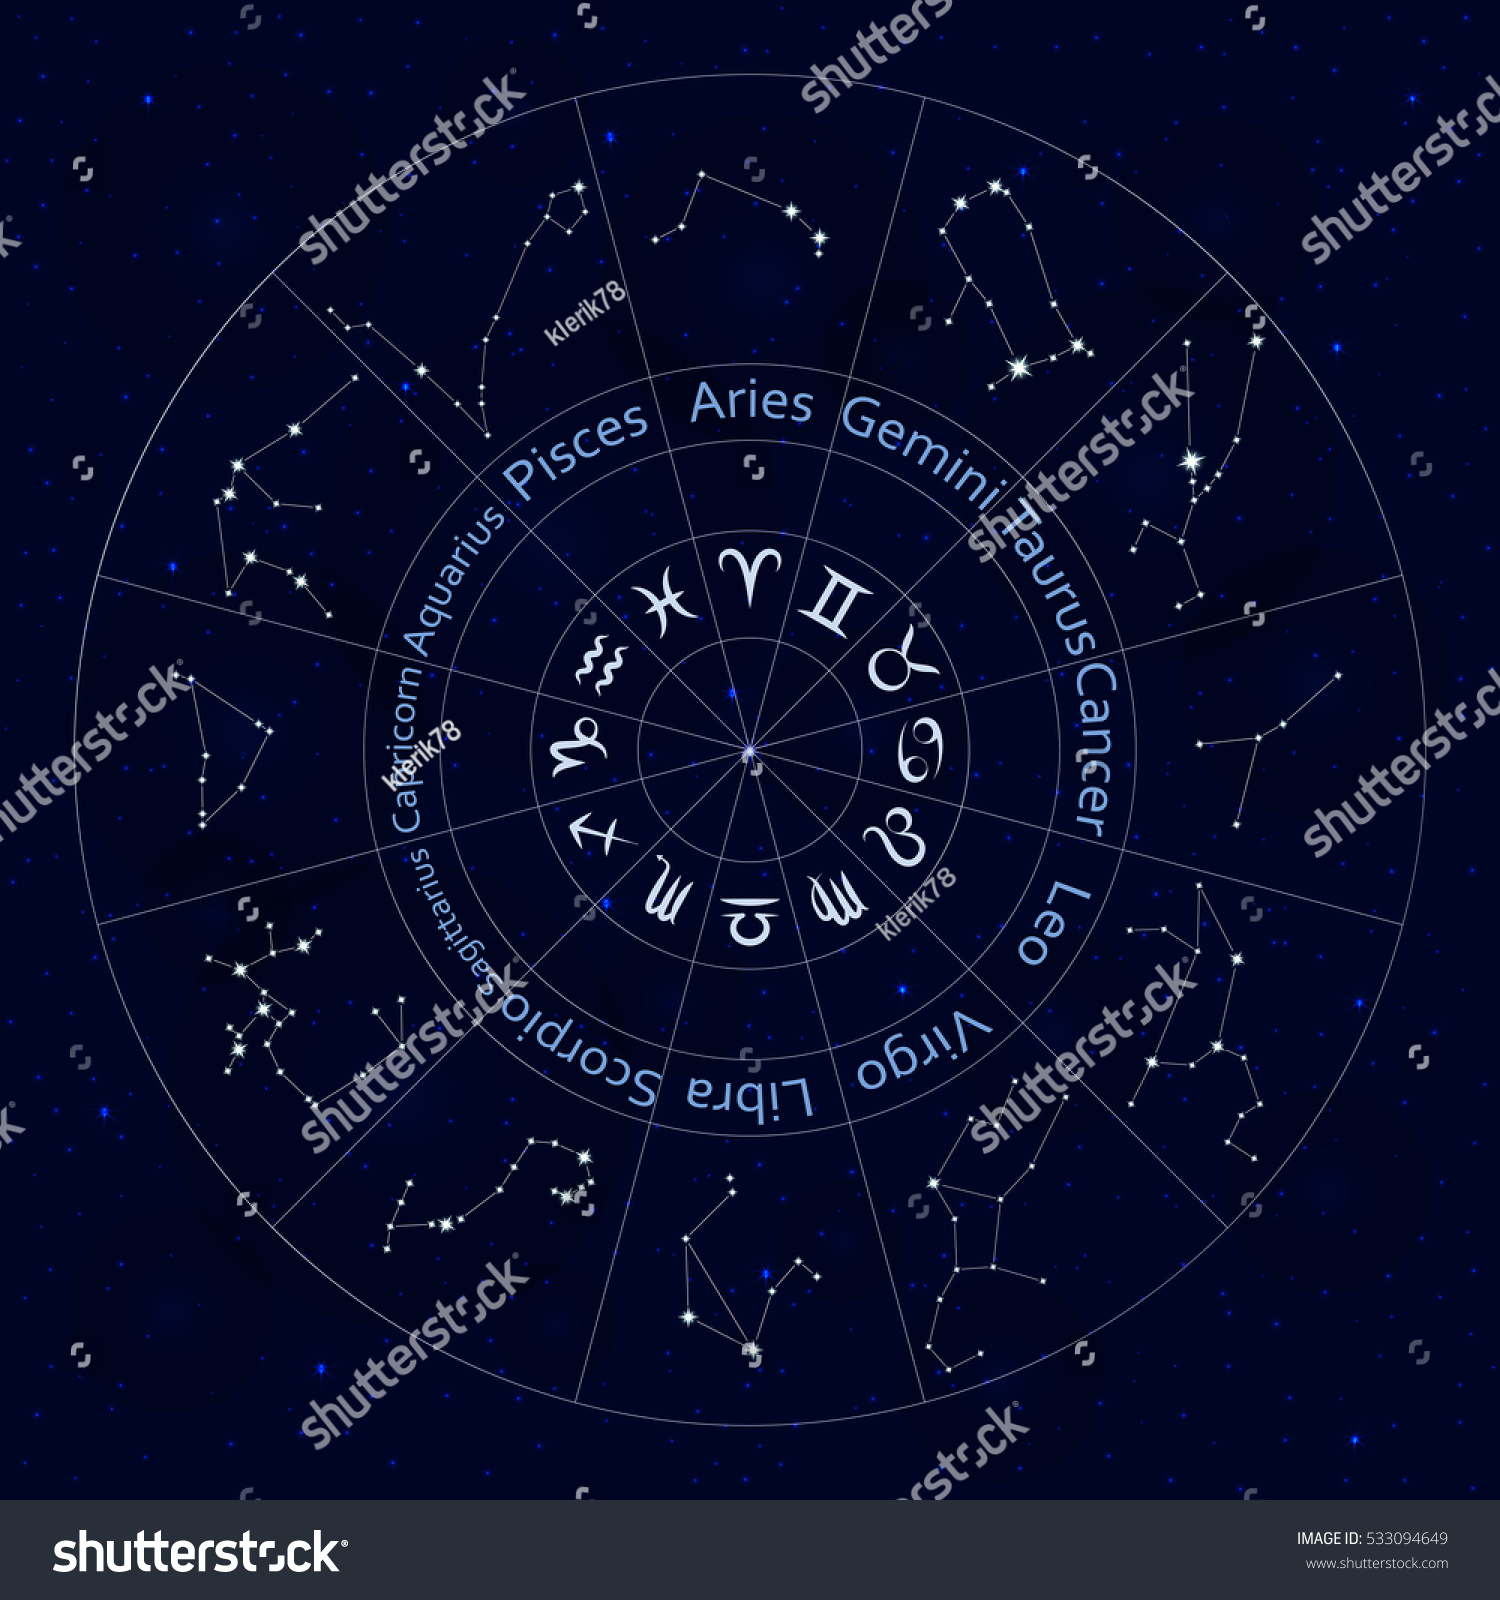 Zodiac Signs Set All Horoscope Constellation Stock Vector (Royalty Free ...